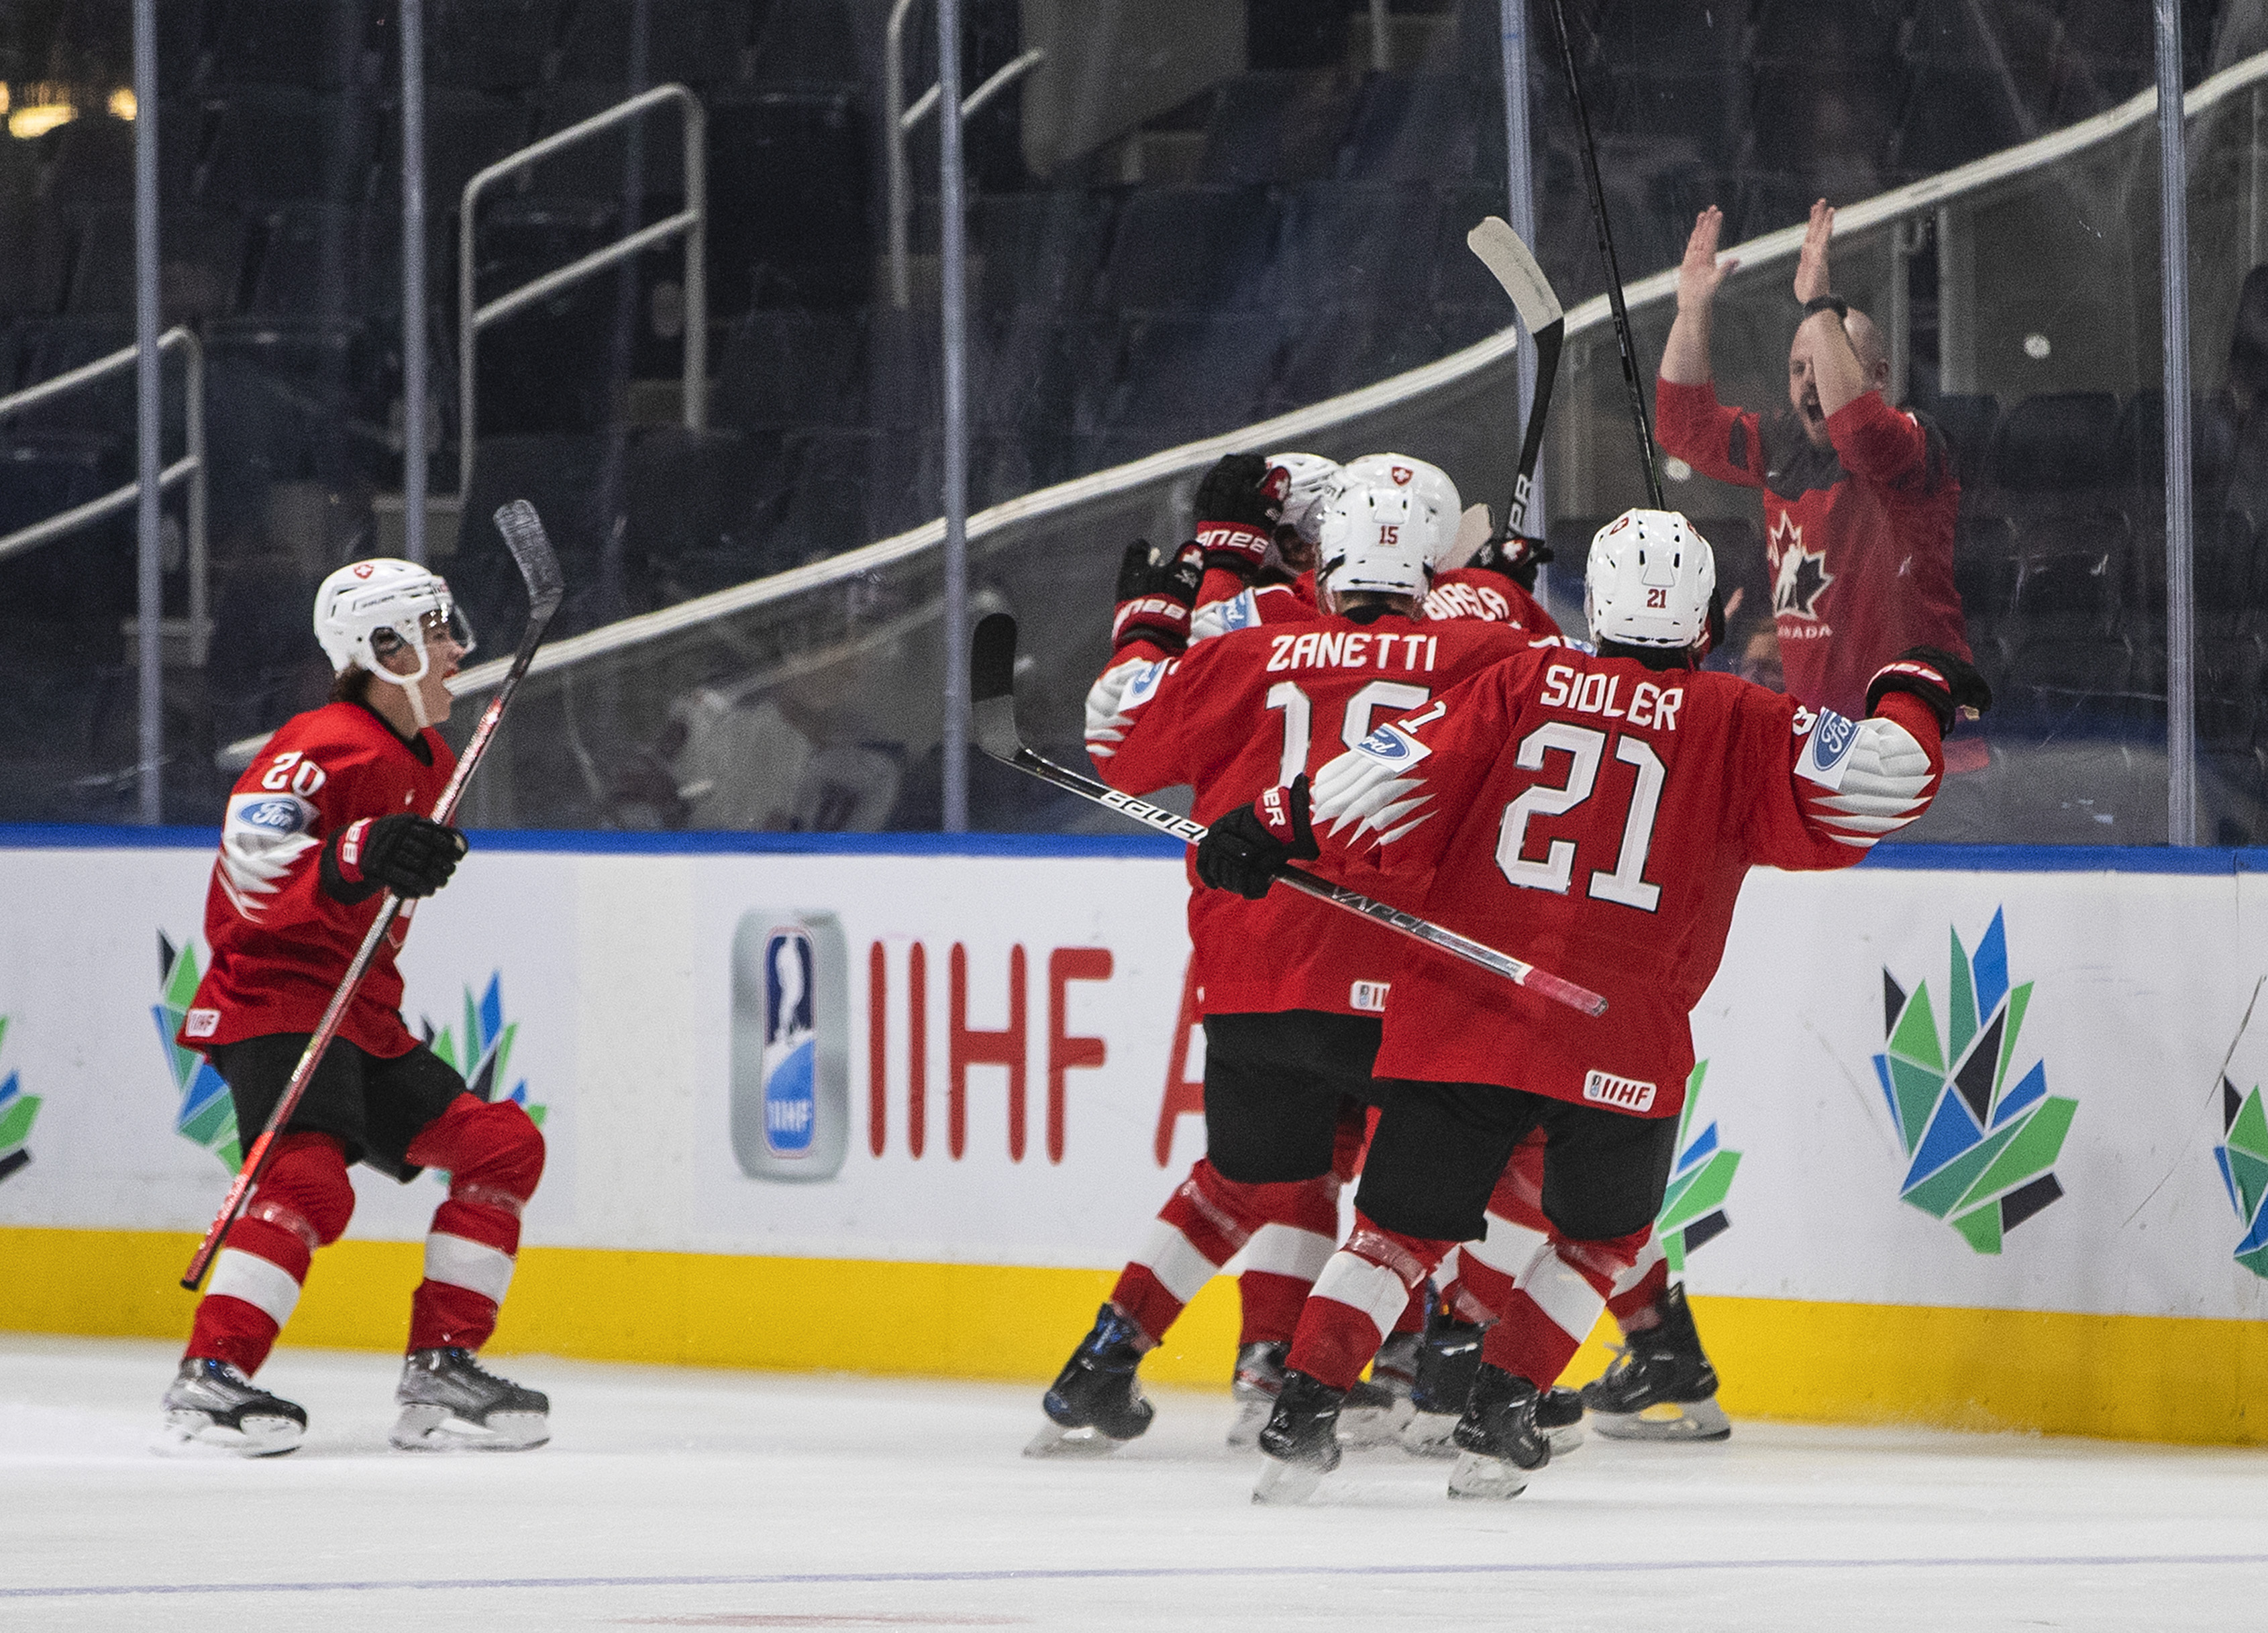 How to Watch the IIHF World Junior Championships on August 15 - Canada v